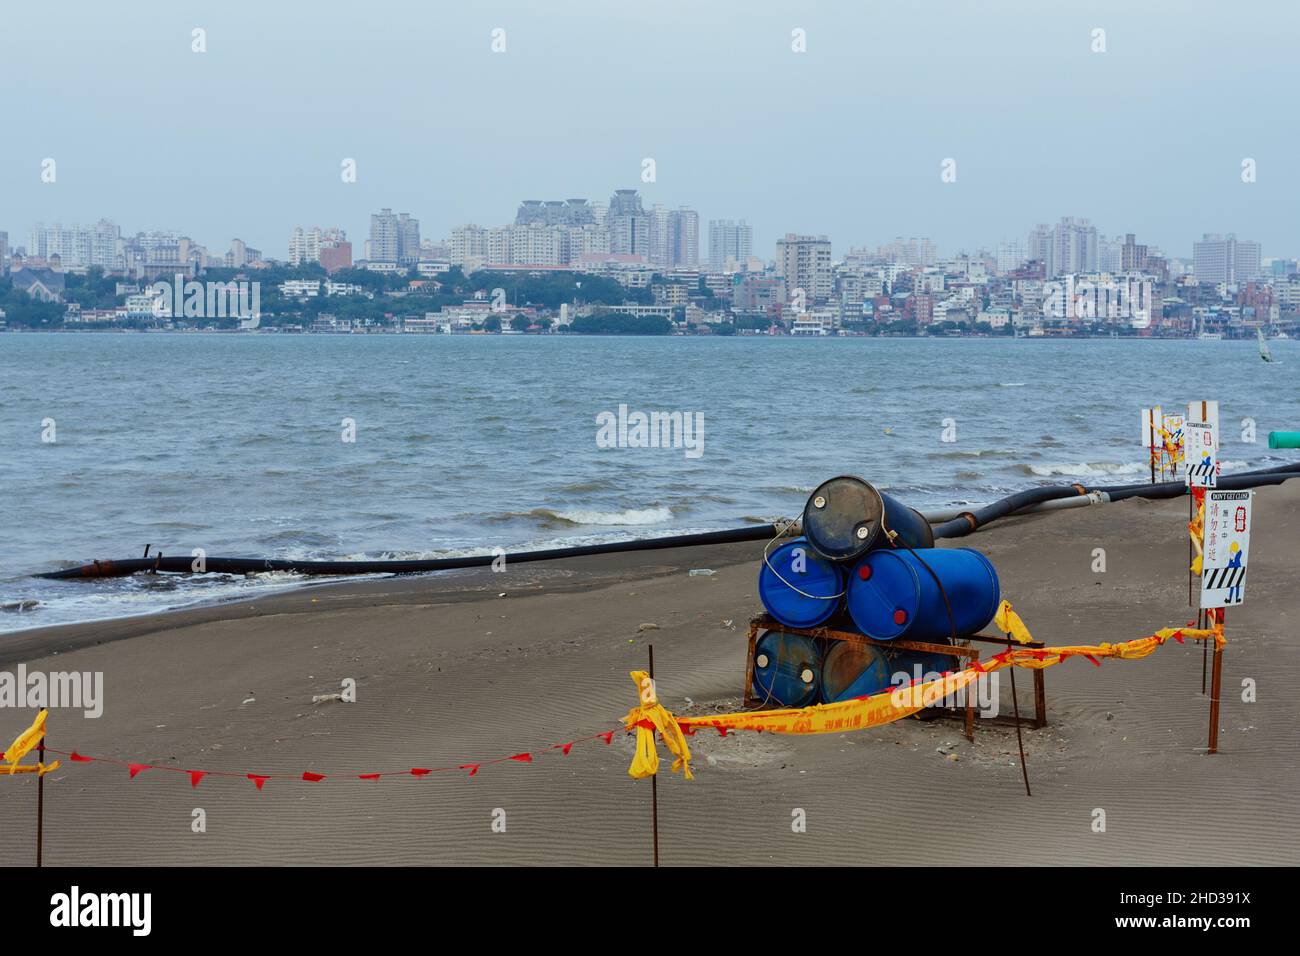 Taipei, Taiwan. 5 December, 2009. A general view shows caution tapes, barrels and pipes laying along the banks of Tamsui River in Bali District, Taipei, Taiwan. Stock Photo